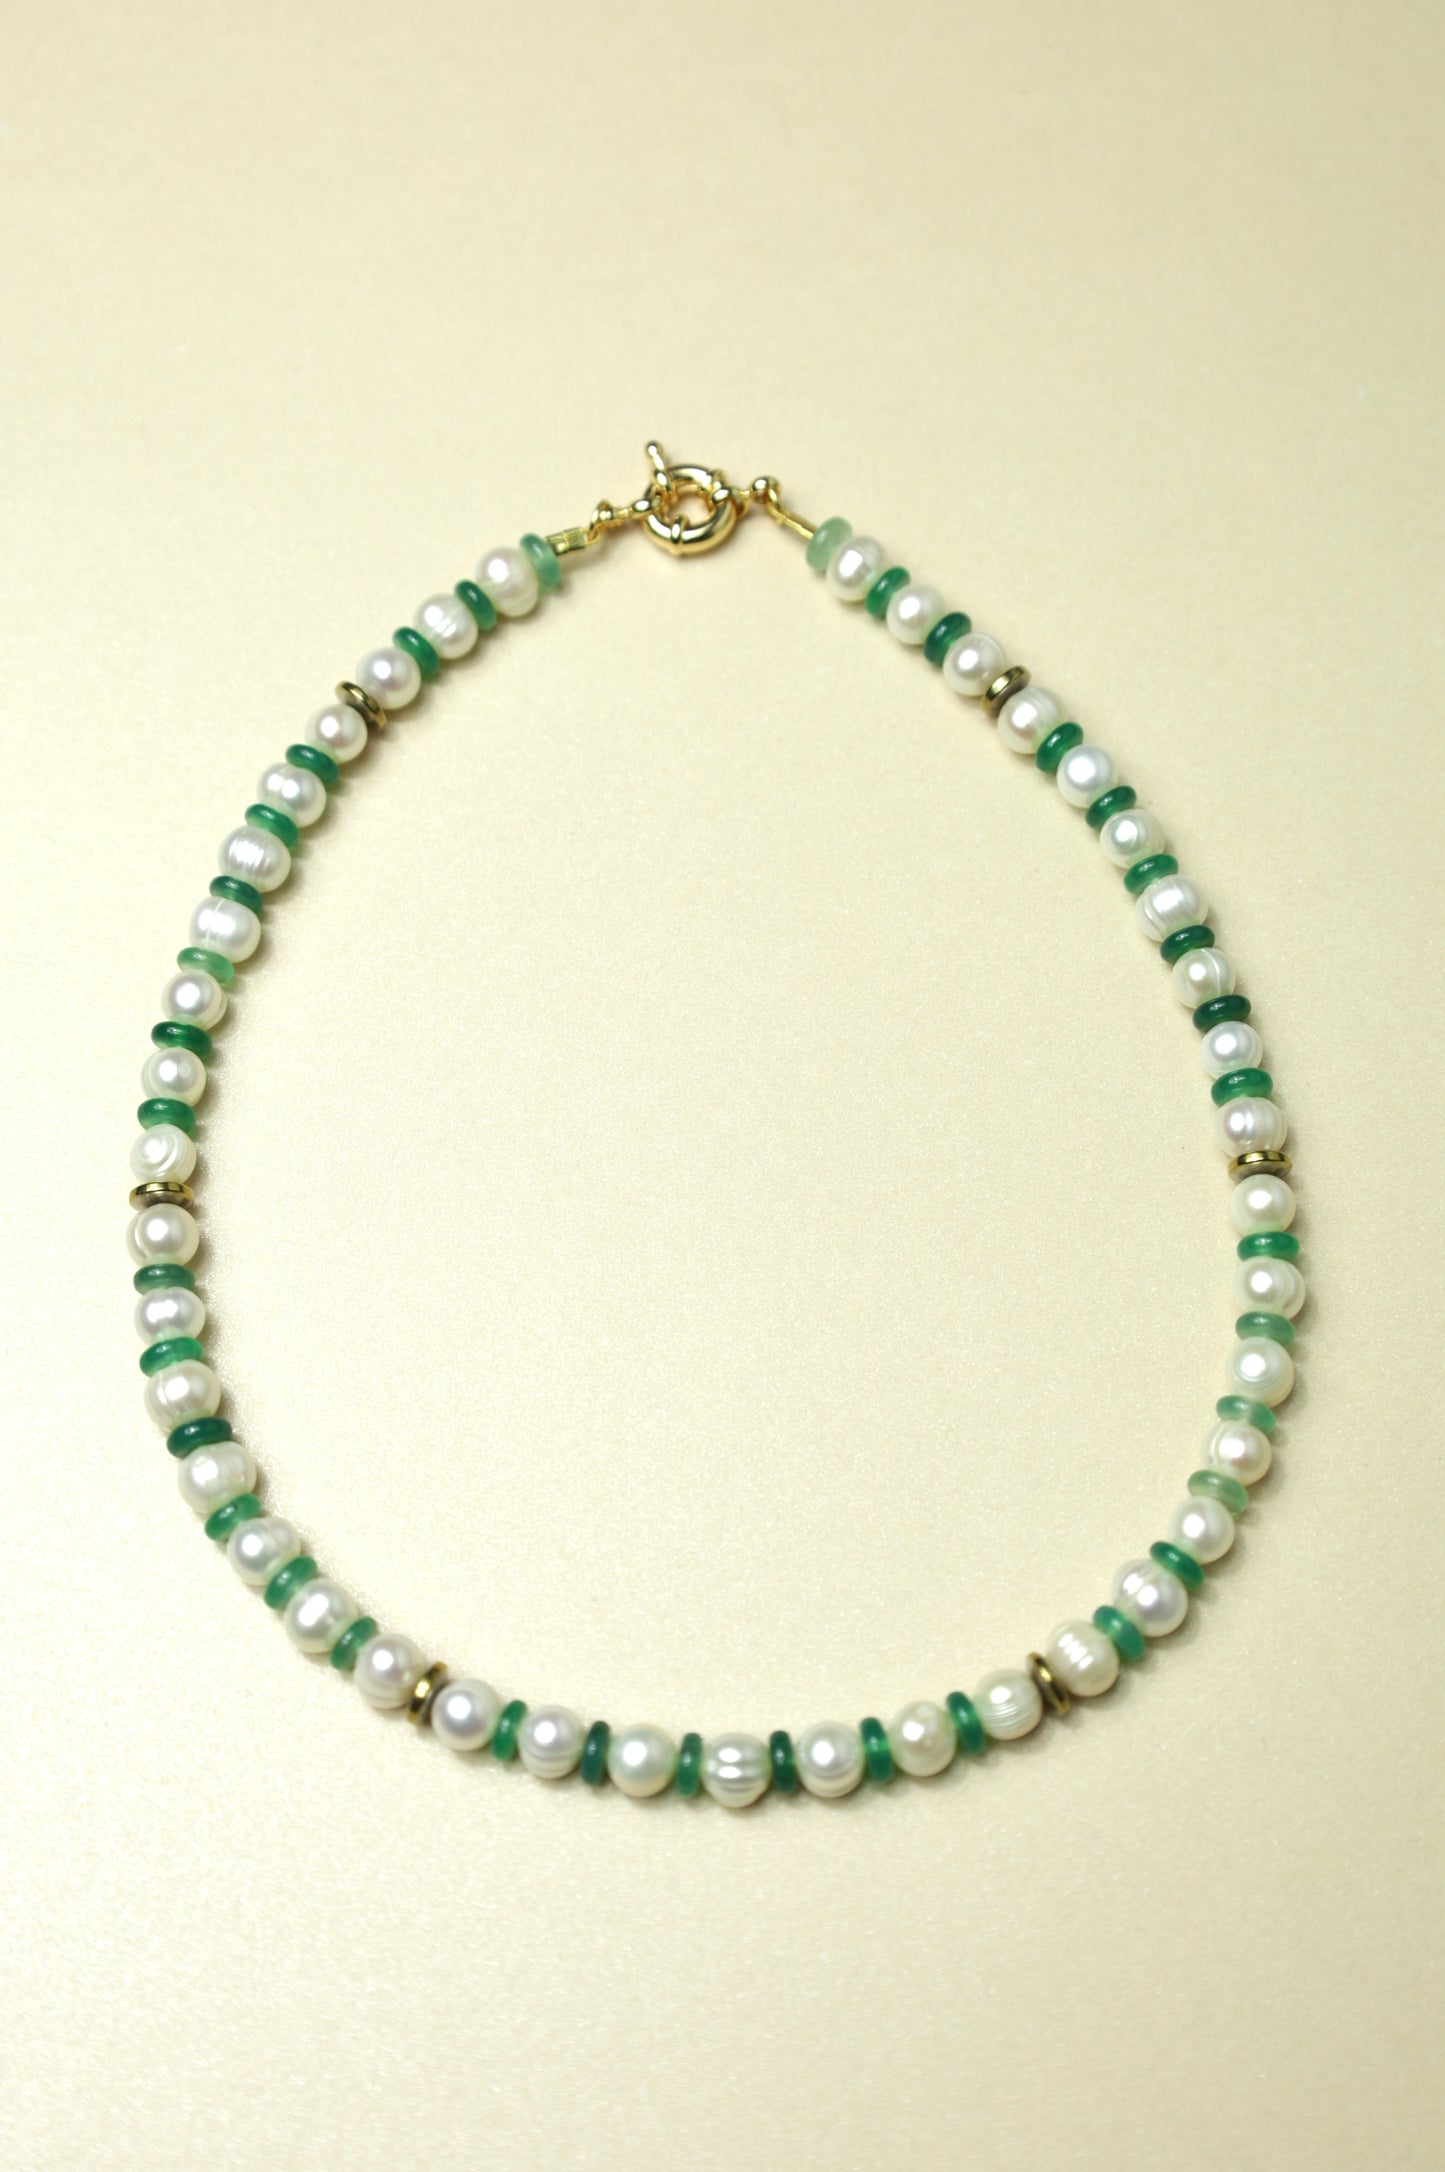 Jean Pearl Beaded Necklace